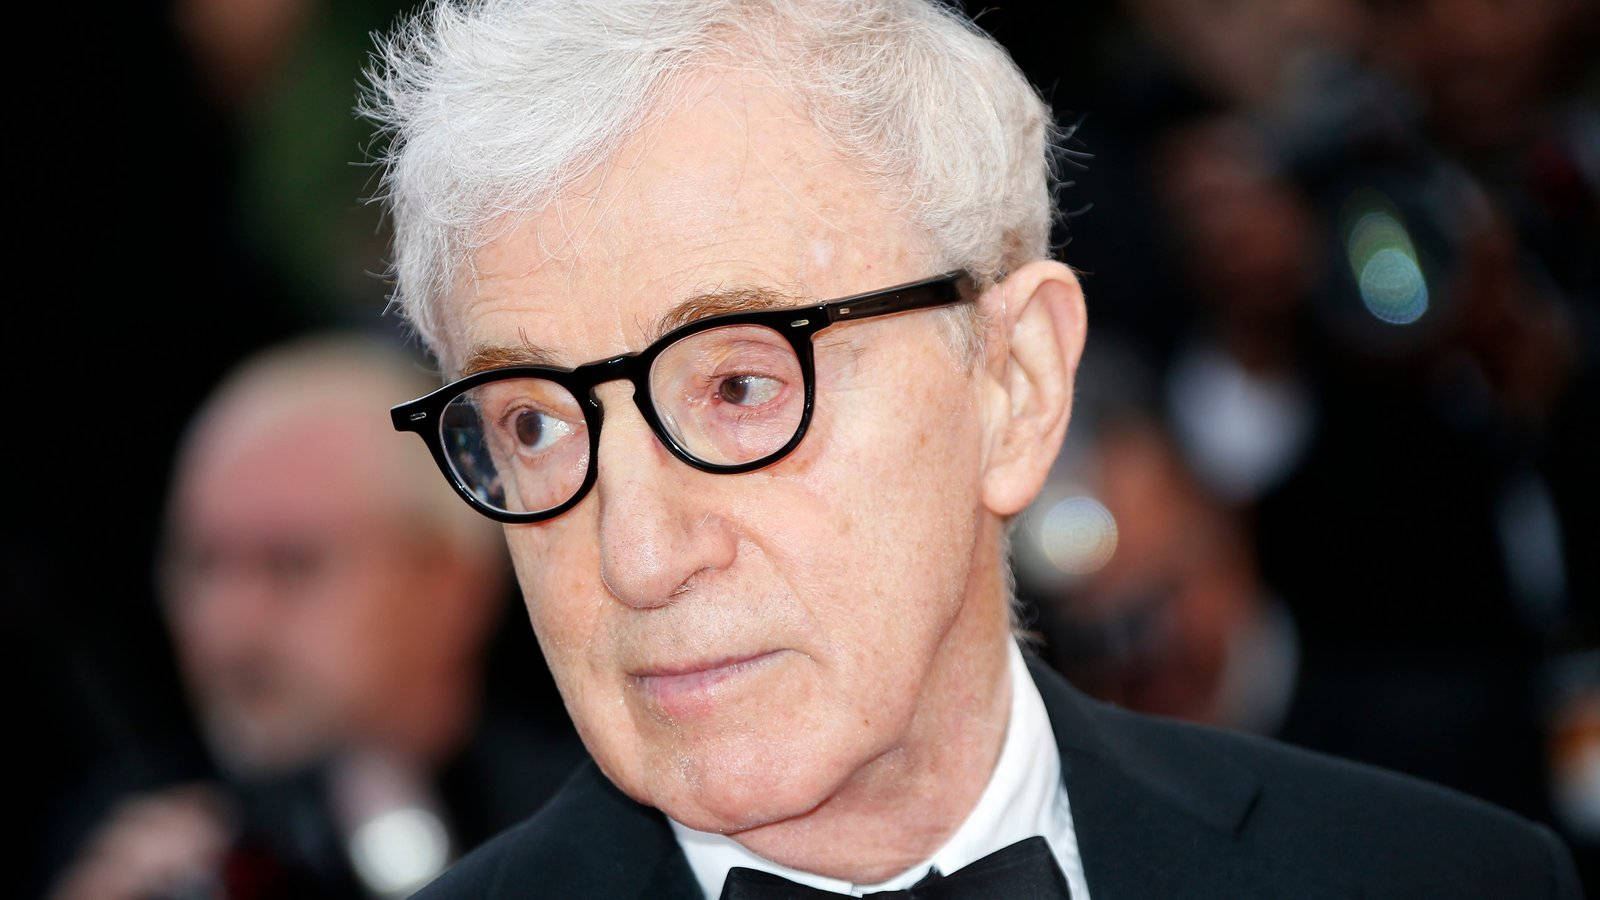 Renowned American Filmmaker Woody Allen at the 69th Cannes Film Festival Wallpaper